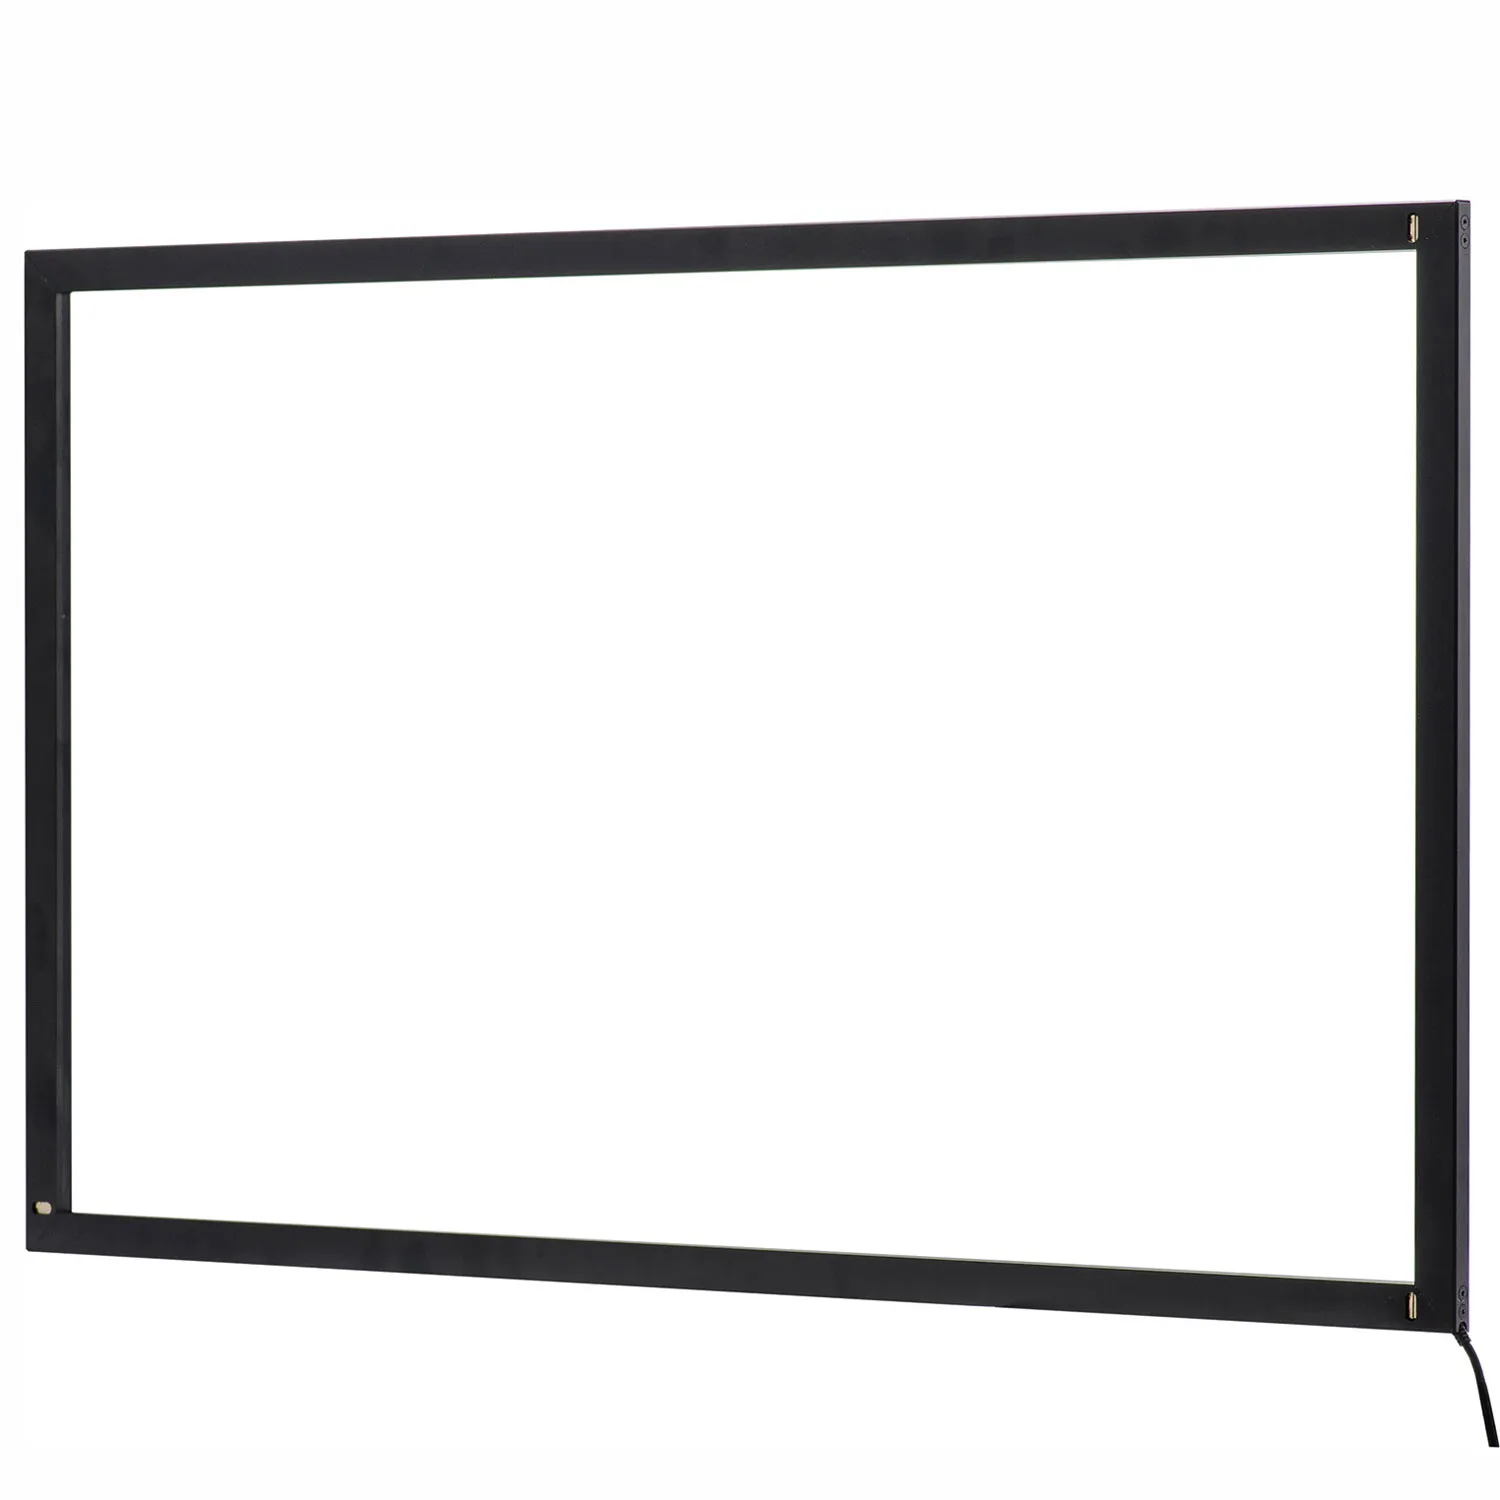 Touch frame Keetouch GmbH 70" KP-700-IP0S001